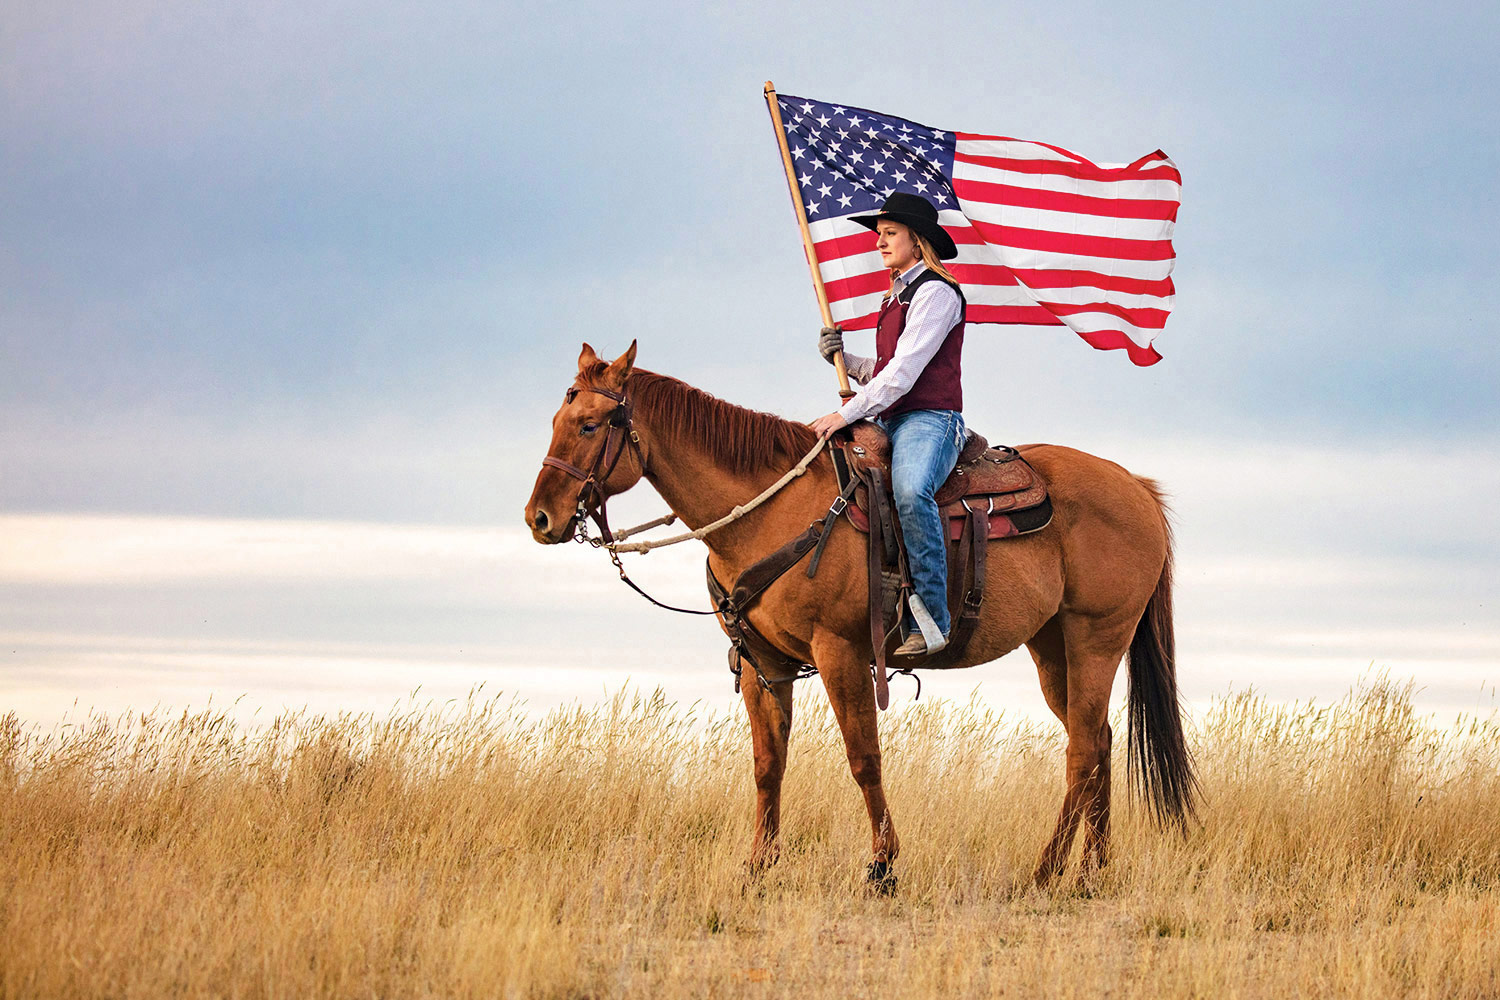 A cowgirl riding horseback with an American flag near Box Elder, Montana. To see more cowgirl photos click here: Cowgirl Photos